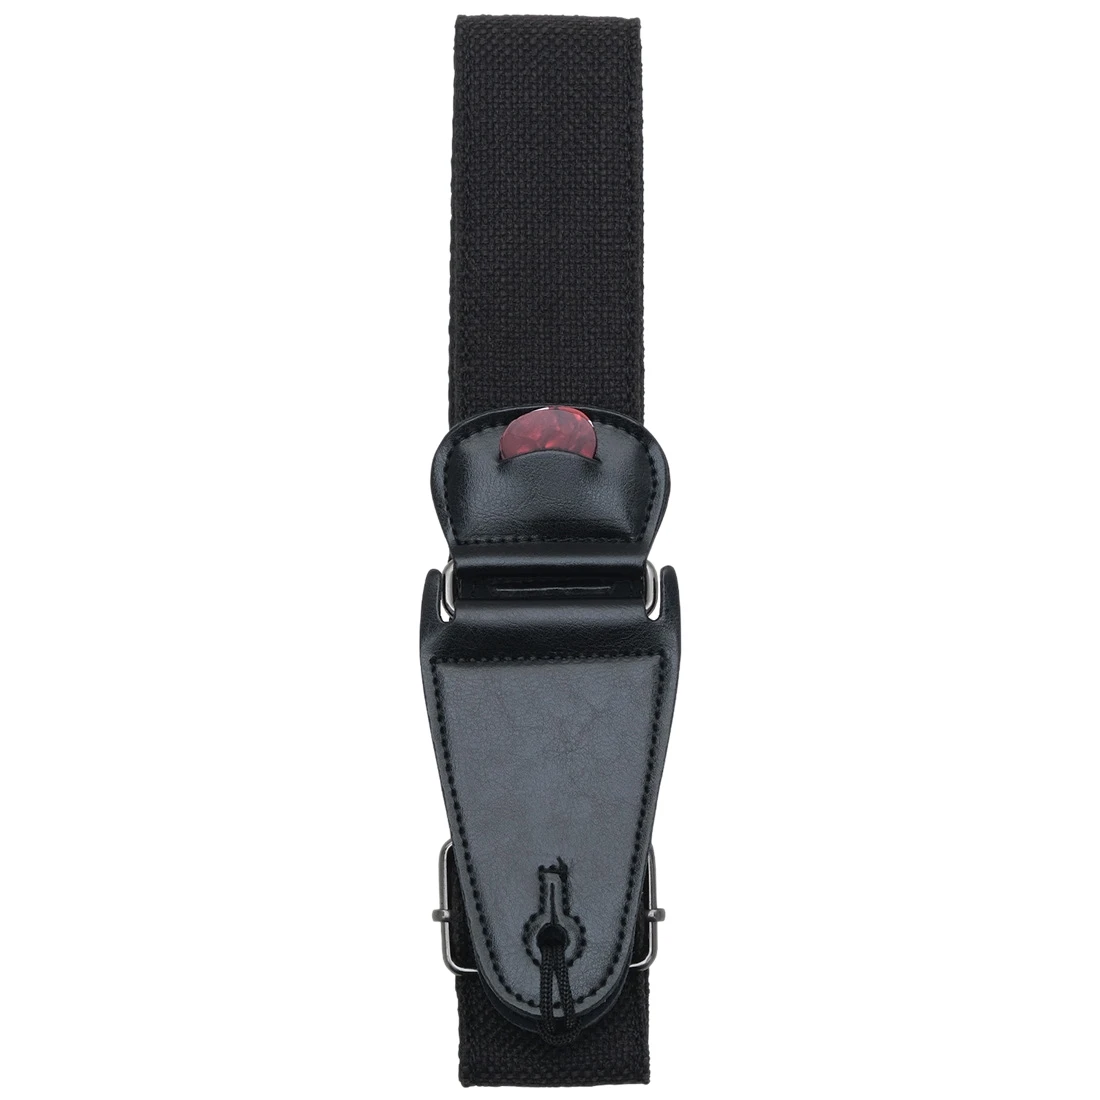 

Guitar Strap,Cotton Guitar Straps with Pick Pocket and Leather Ends for Bass,Electric&Acoustic,with Free 2 Guitar Picks